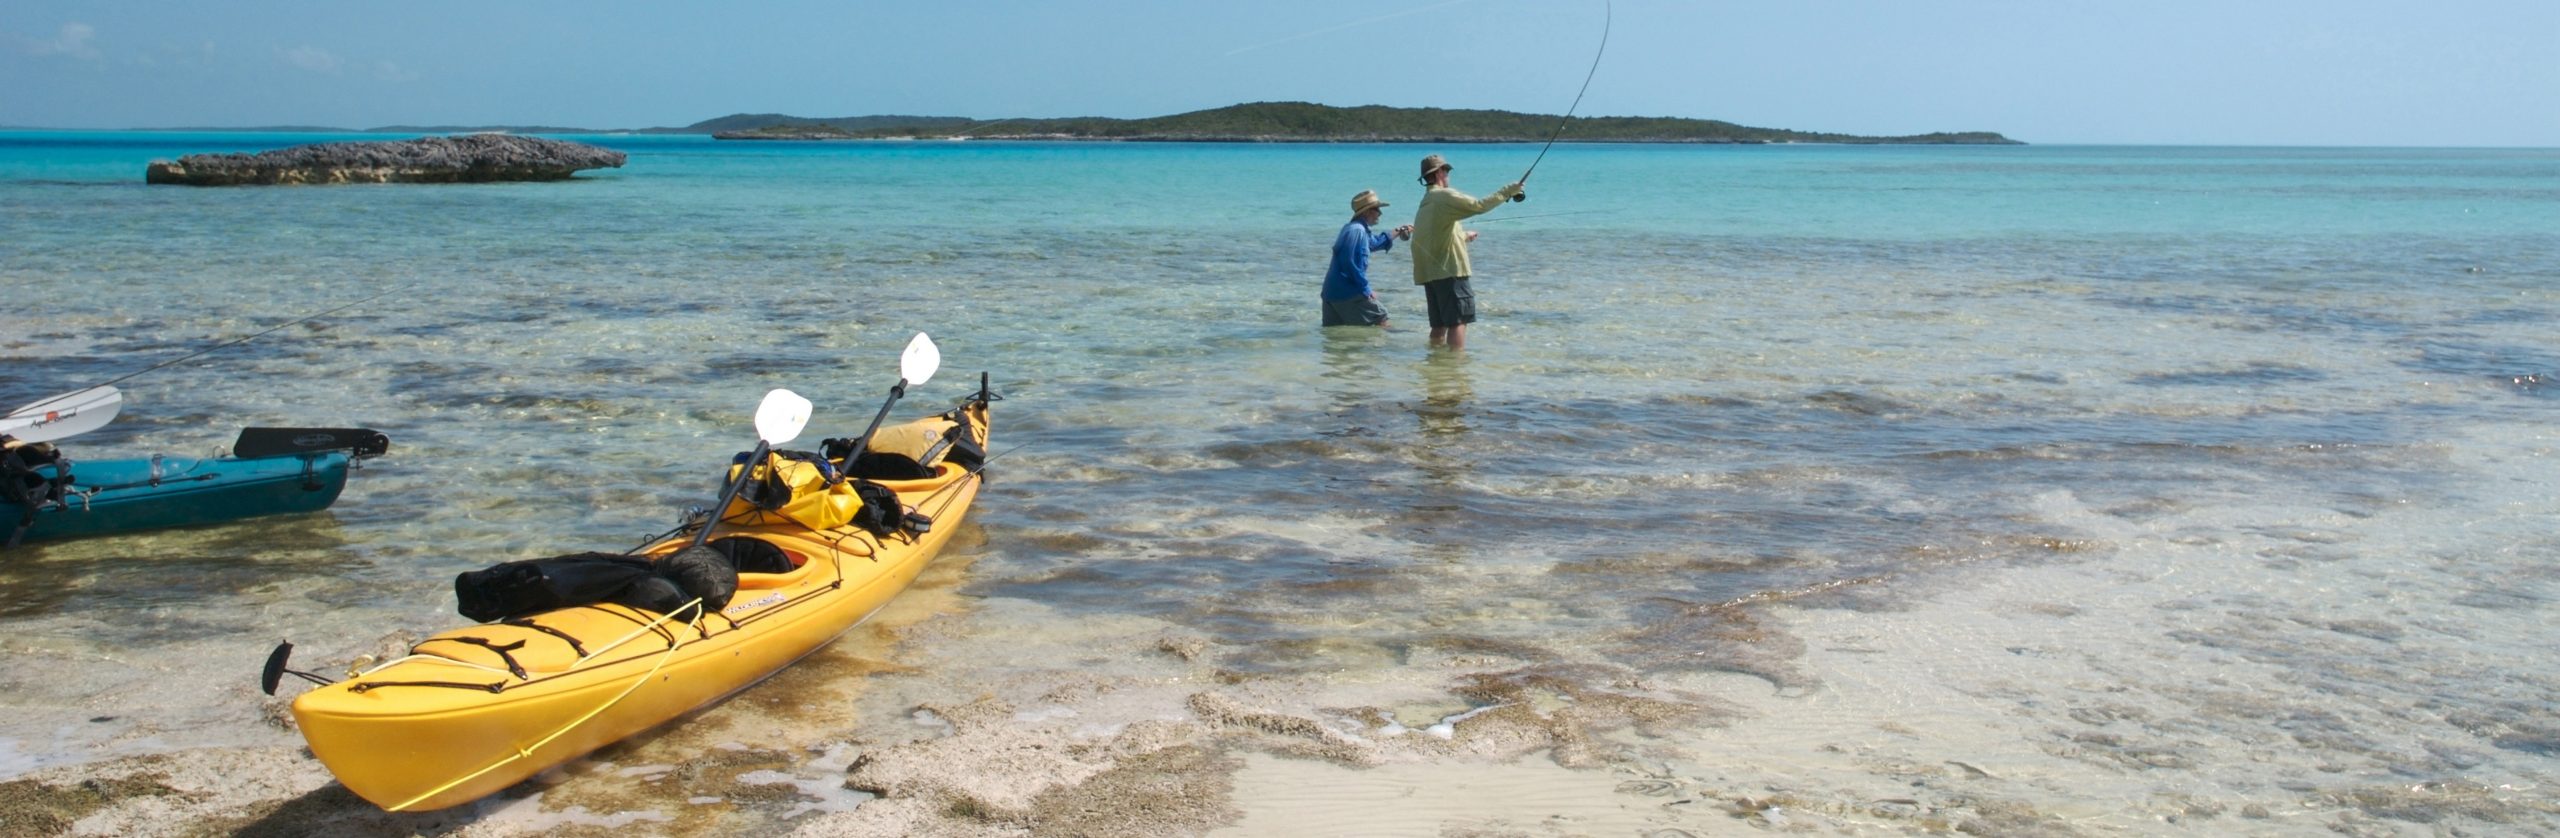 Bahamas by Boat: Kayaking the Cays